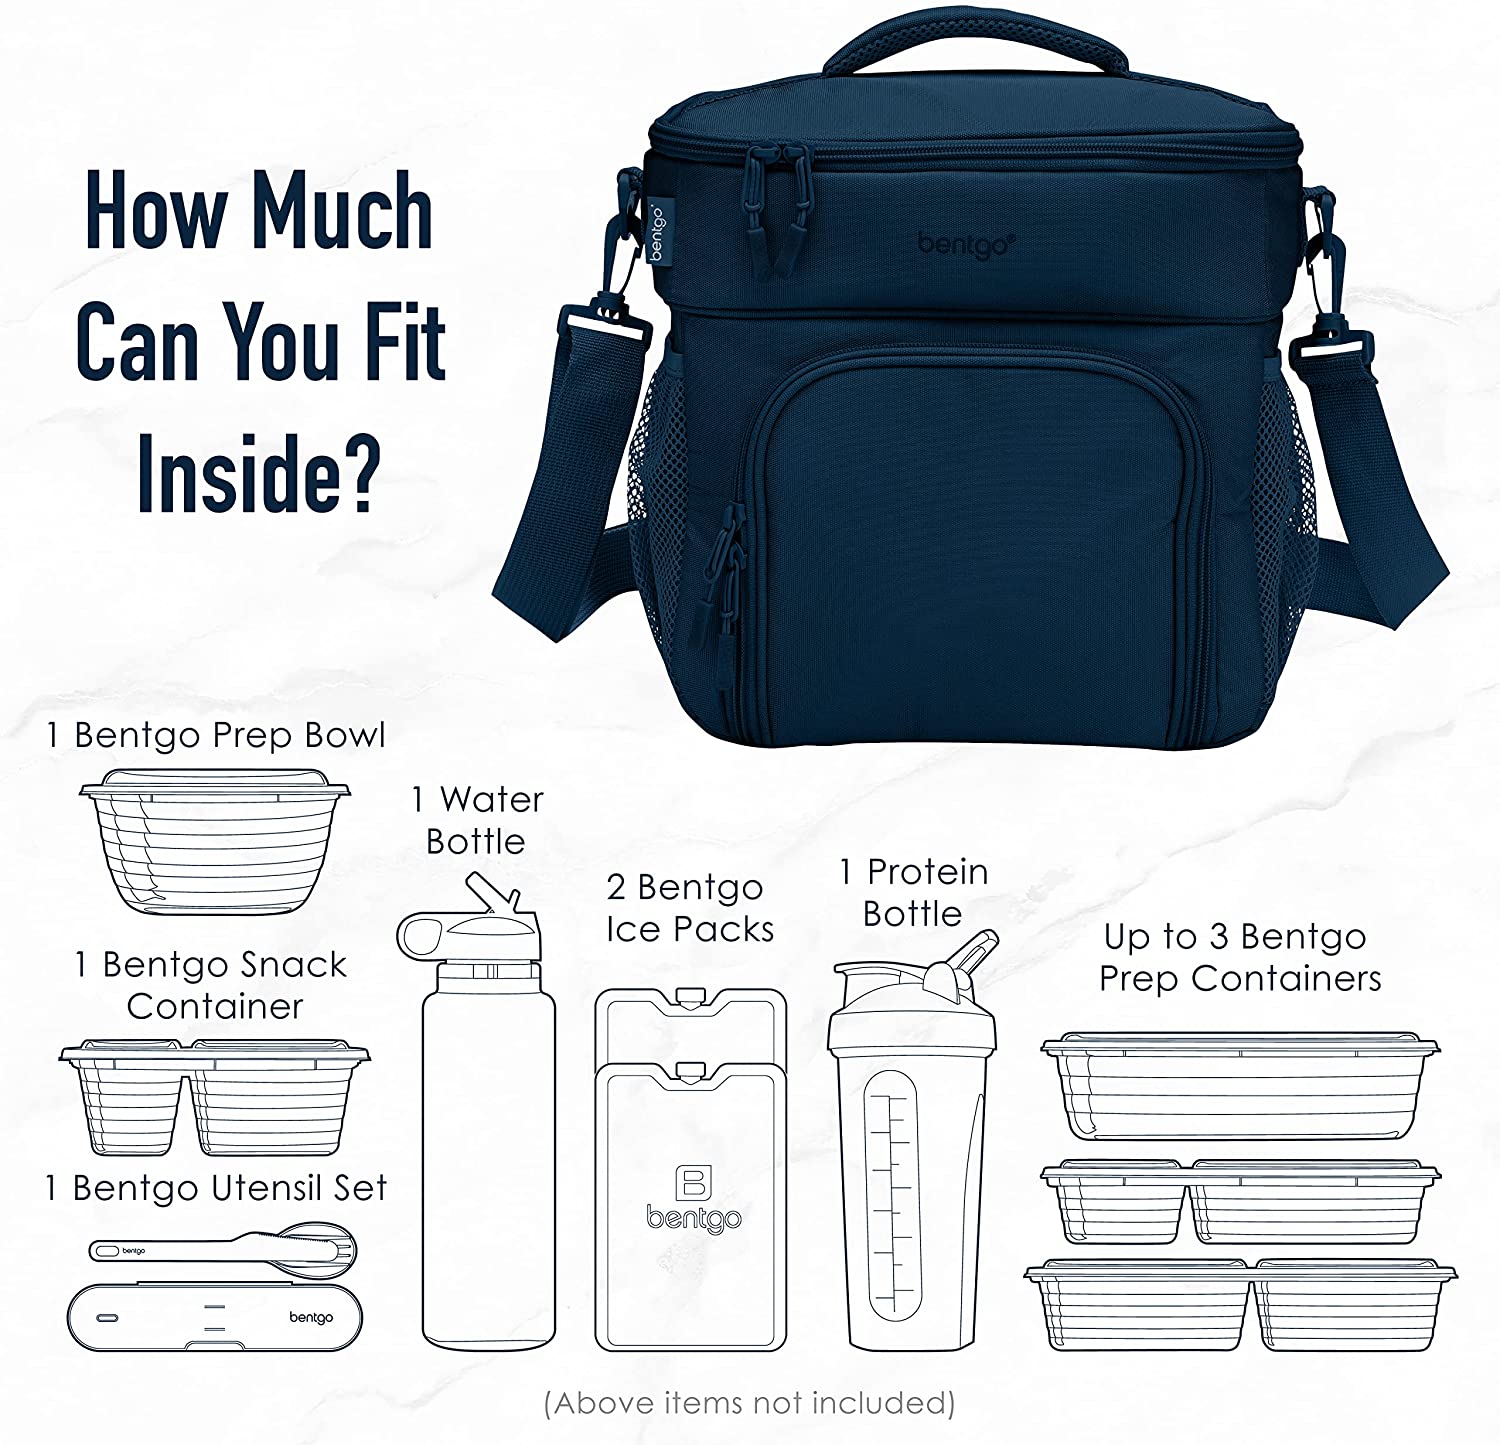 https://bigbigmart.com/wp-content/uploads/2022/07/Bentgo%C2%AE-Prep-Deluxe-Multimeal-Bag-Premium-Insulation-up-to-8-Hrs-with-Water-Resistant-Exterior-Interior-Extra-Large-Lunch-Bag-Holds-4-Meals-Snacks-Great-for-All-Day-Meal-Prep-Navy-Blue7.jpg